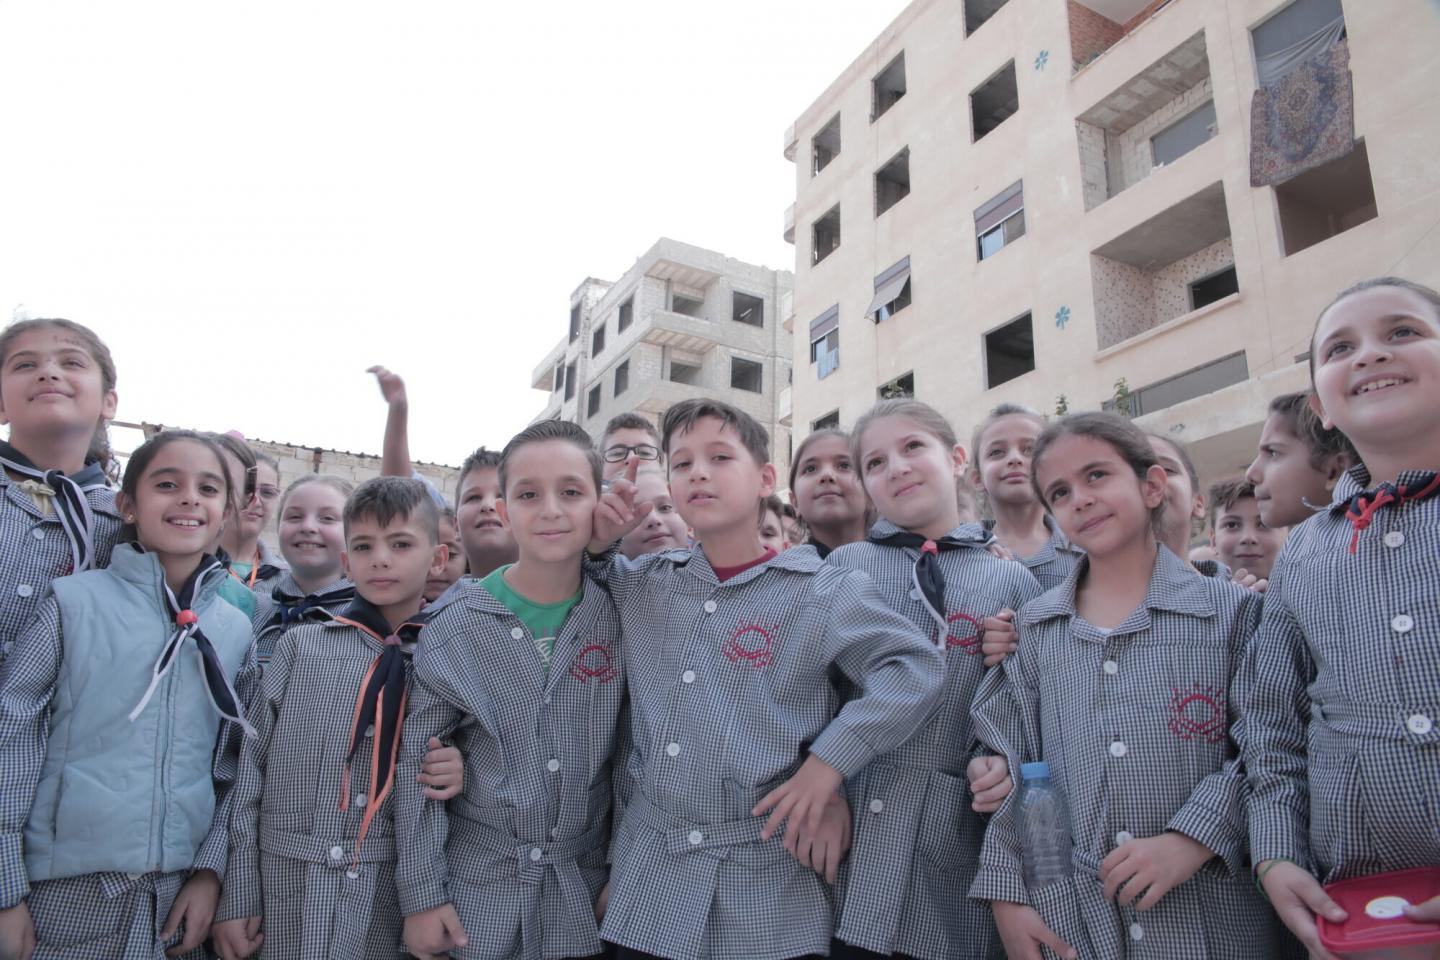 A large group of Syrian kids in school uniforms